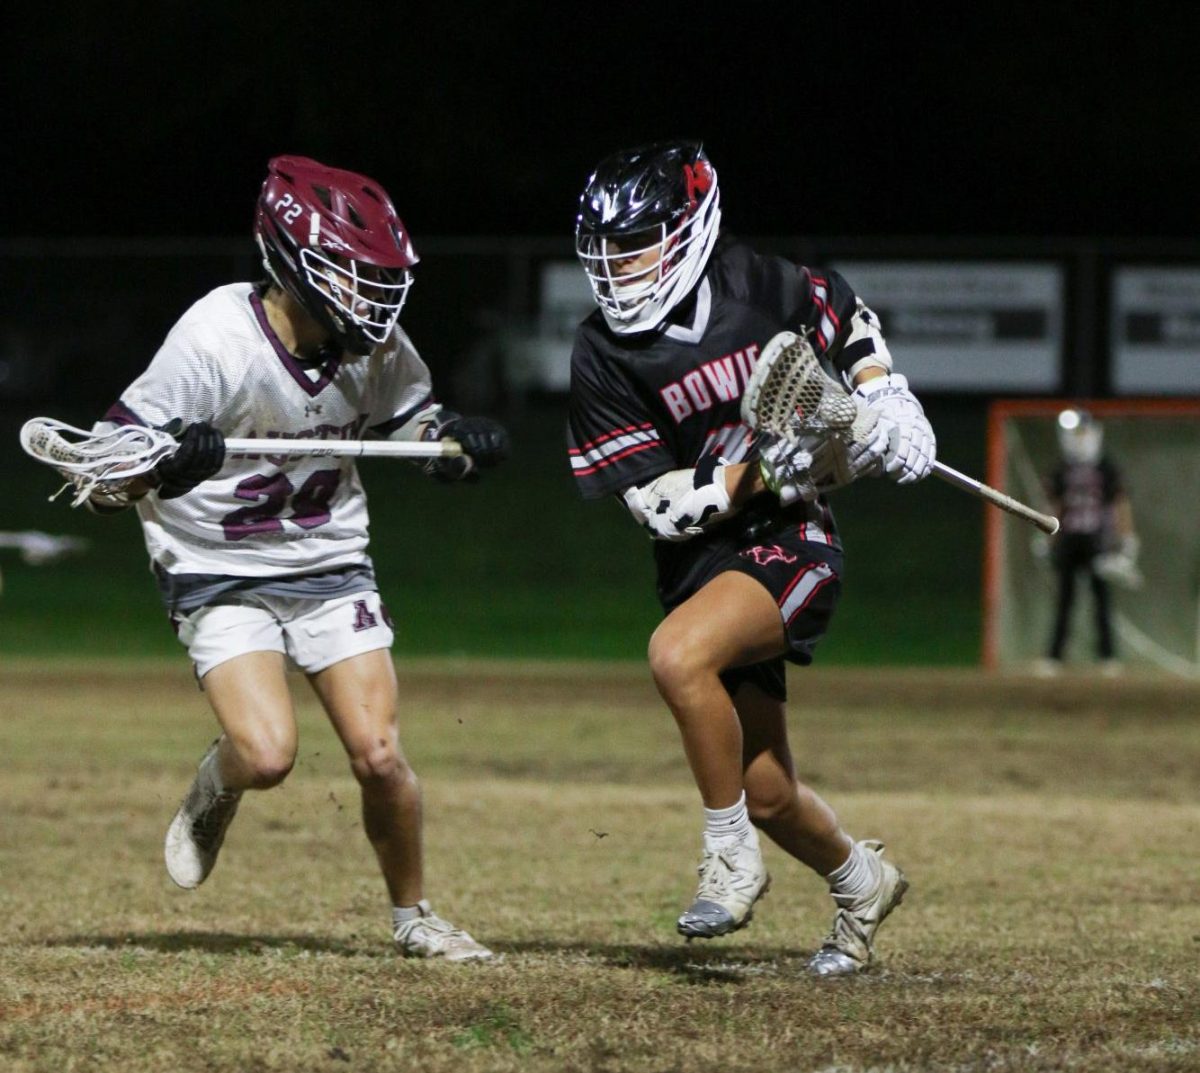 FACE-TO-FACE%3A+Sophomore+Cole+Wong+runs+toe-to-toe+with+an+Austin+High+defender.+Bowie+struggled+offensively+and+end+up+losing+21-2+to+the+Maroons+%E2%80%9CThey+are+a+very+experienced+and+physical+team%2C+and+we+have+a+lot+to+work+on%2C%E2%80%9D+midfielder+Wong+said.+%E2%80%9CMy+game+knowledge+and+field+vision+is+better+this+year+and+I+hope+that+I+can+utilize+those+skills+to+score+more+goals+and+help+my+teammates.%E2%80%9D